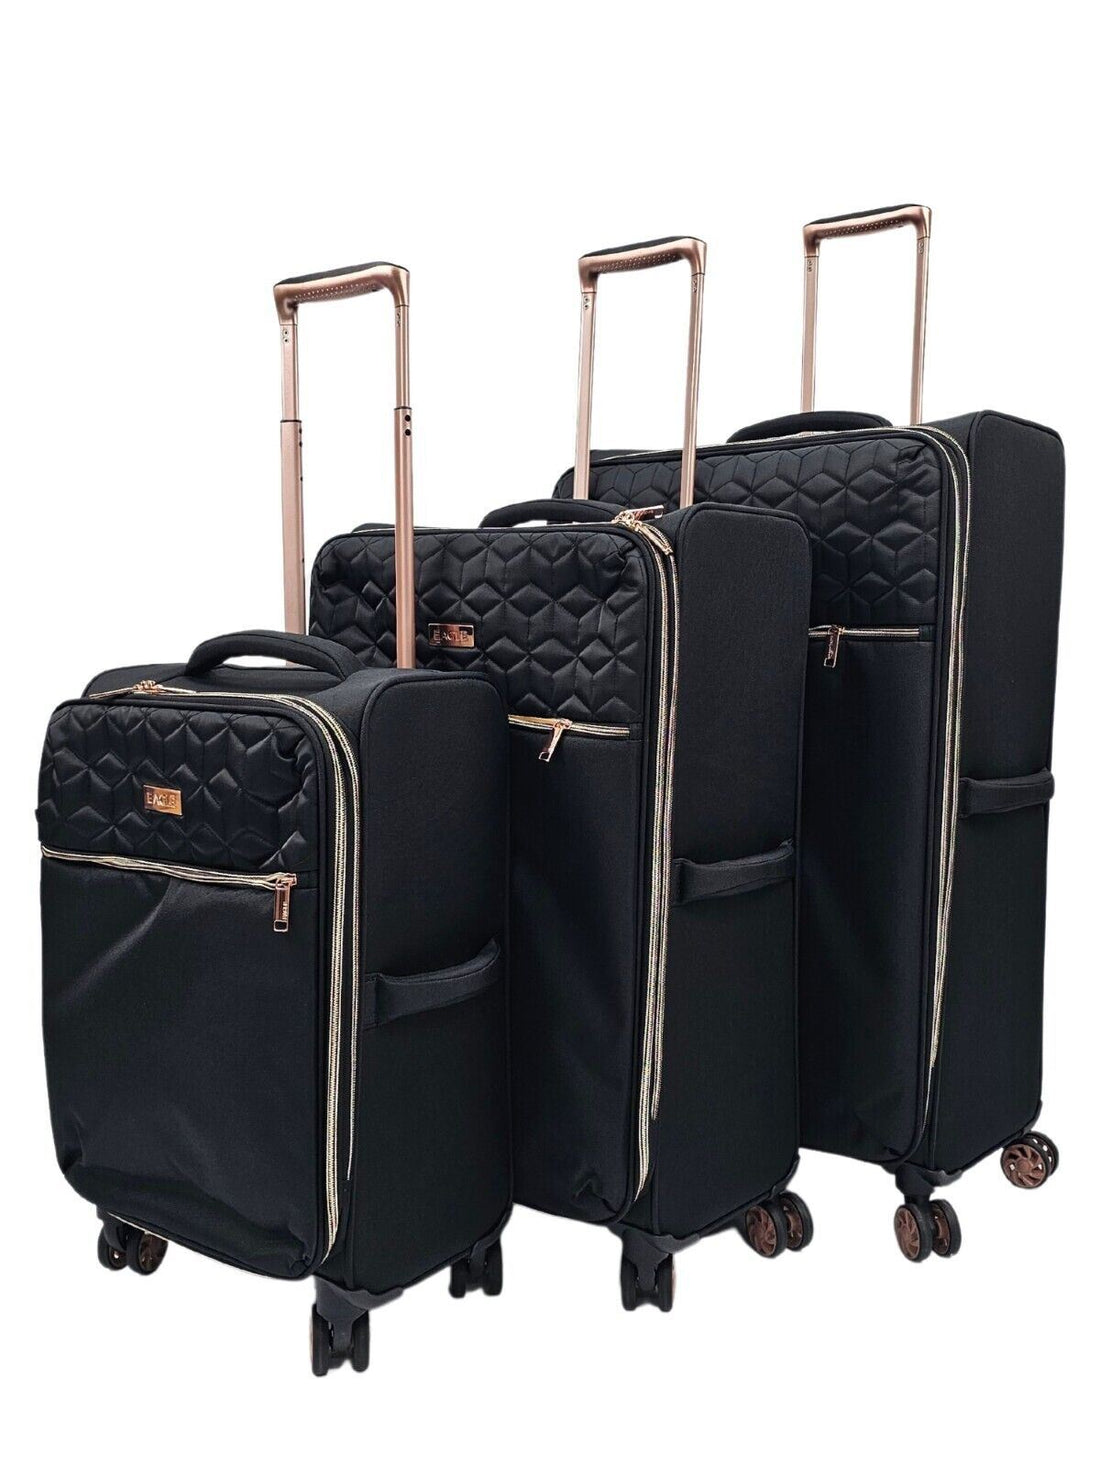 Cabin Black Suitcases Set 4 Wheel Luggage Travel Lightweight Bags - Upperclass Fashions 